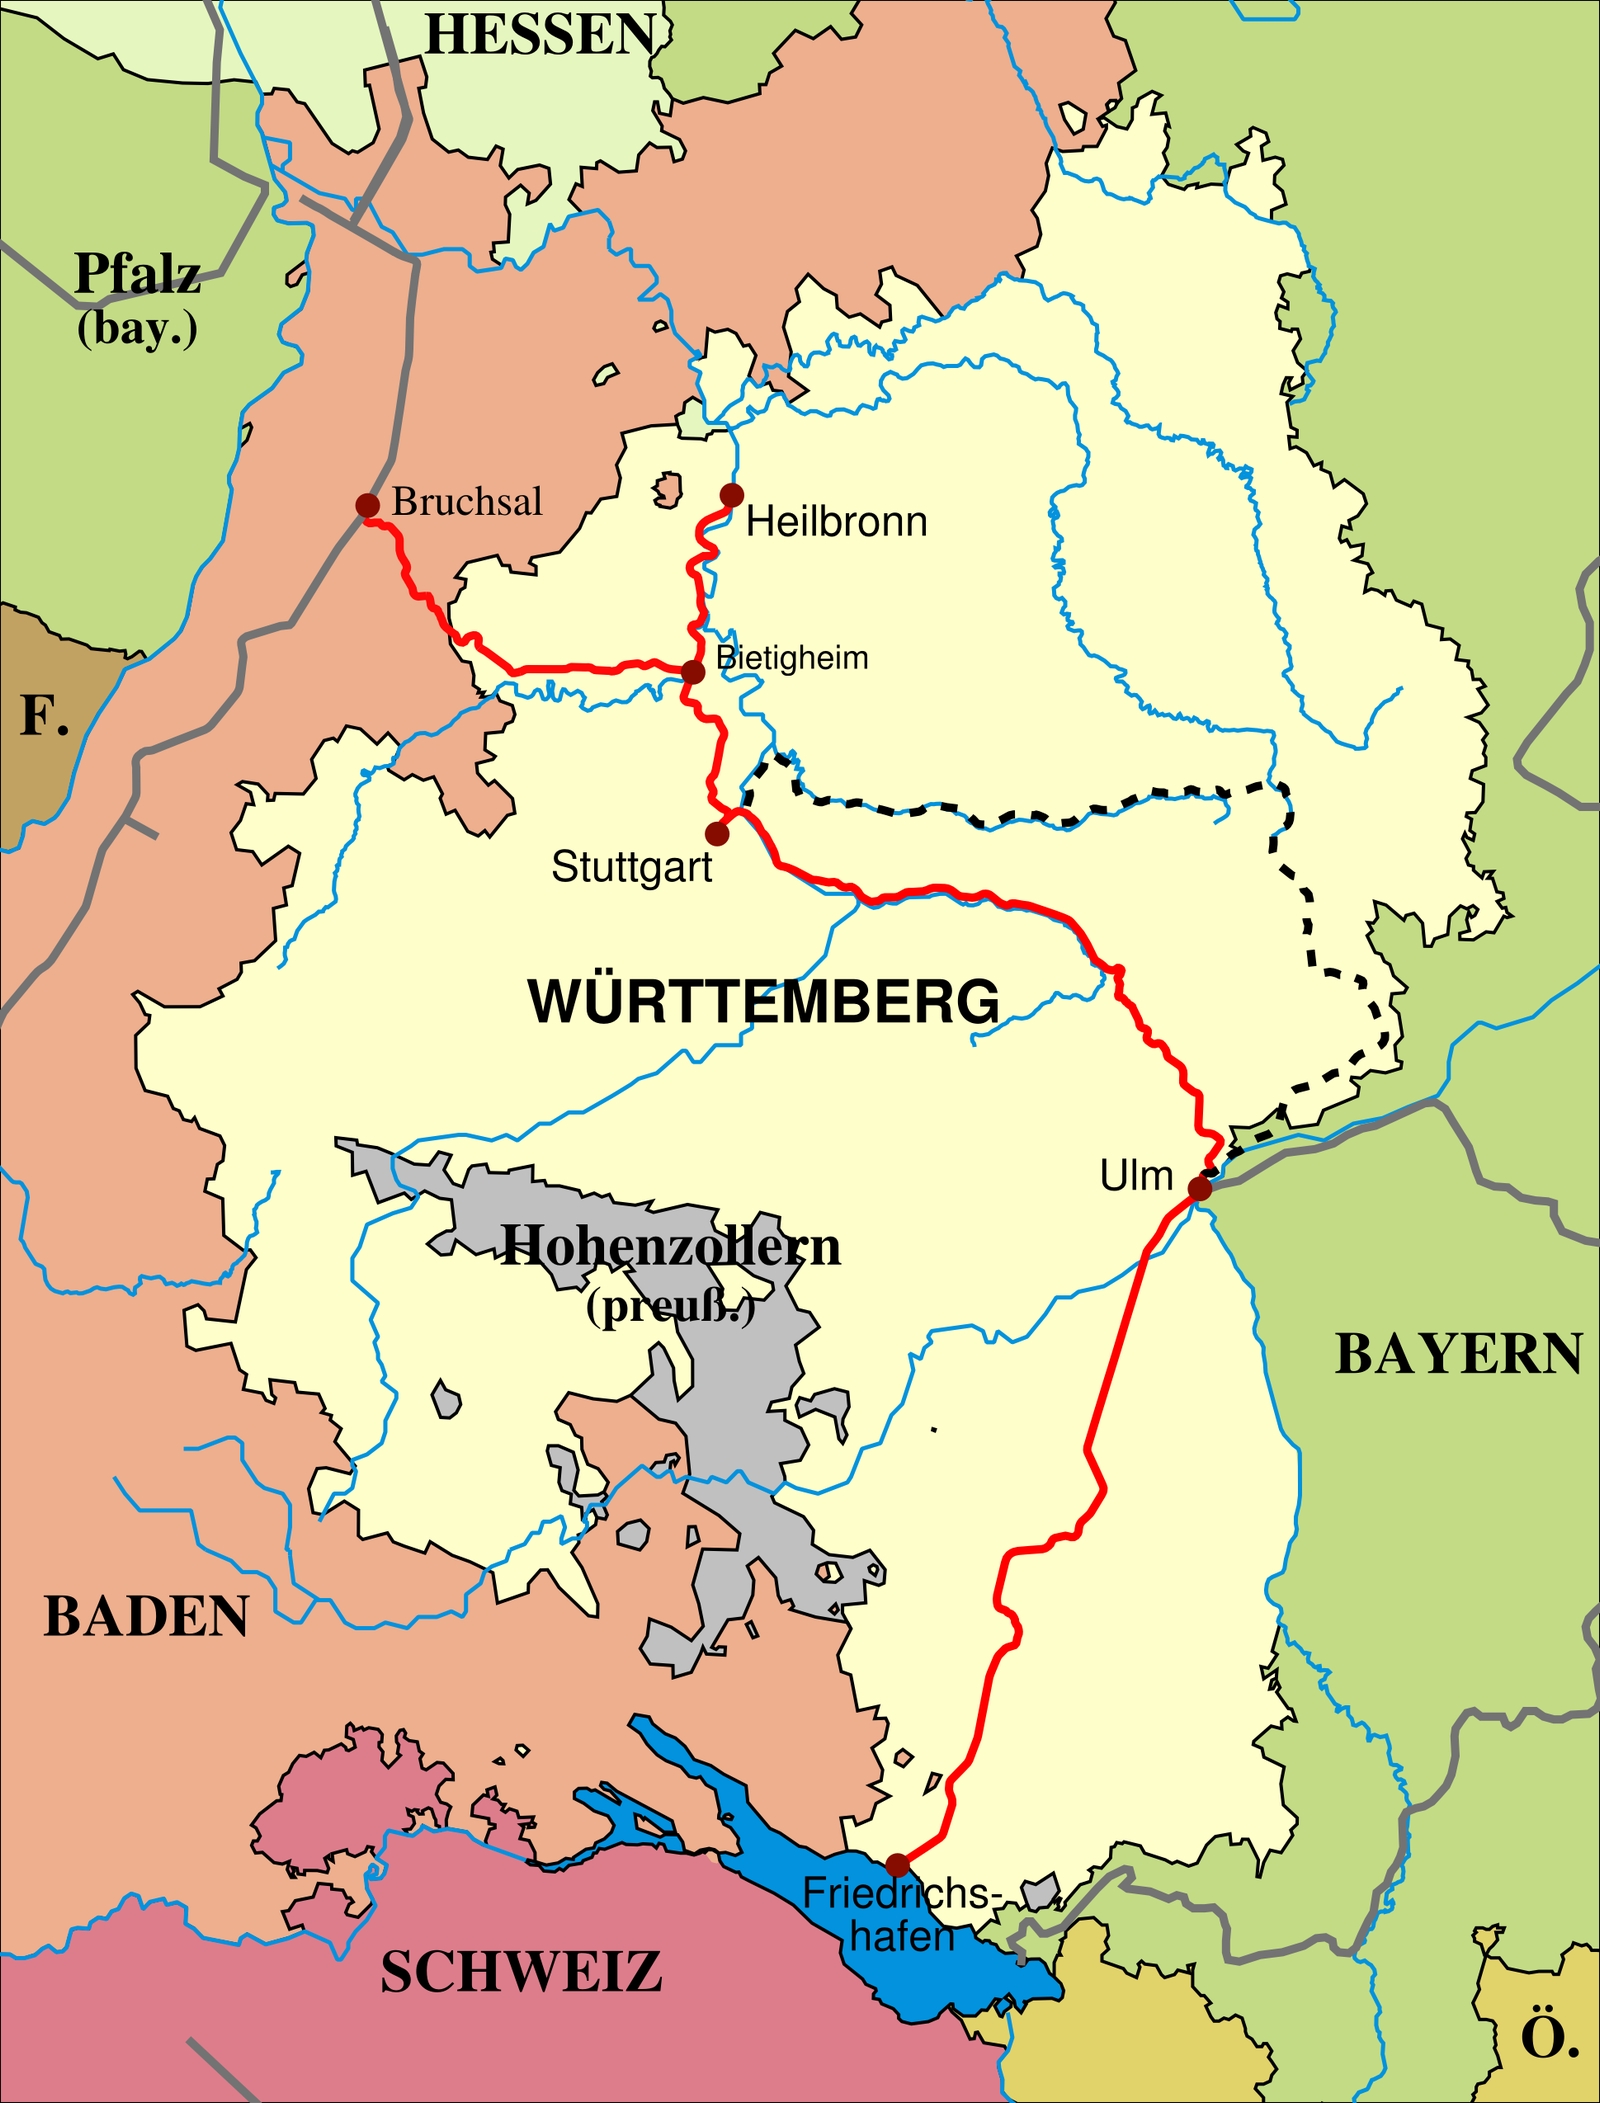 State of the Württemberg main routes from 1854